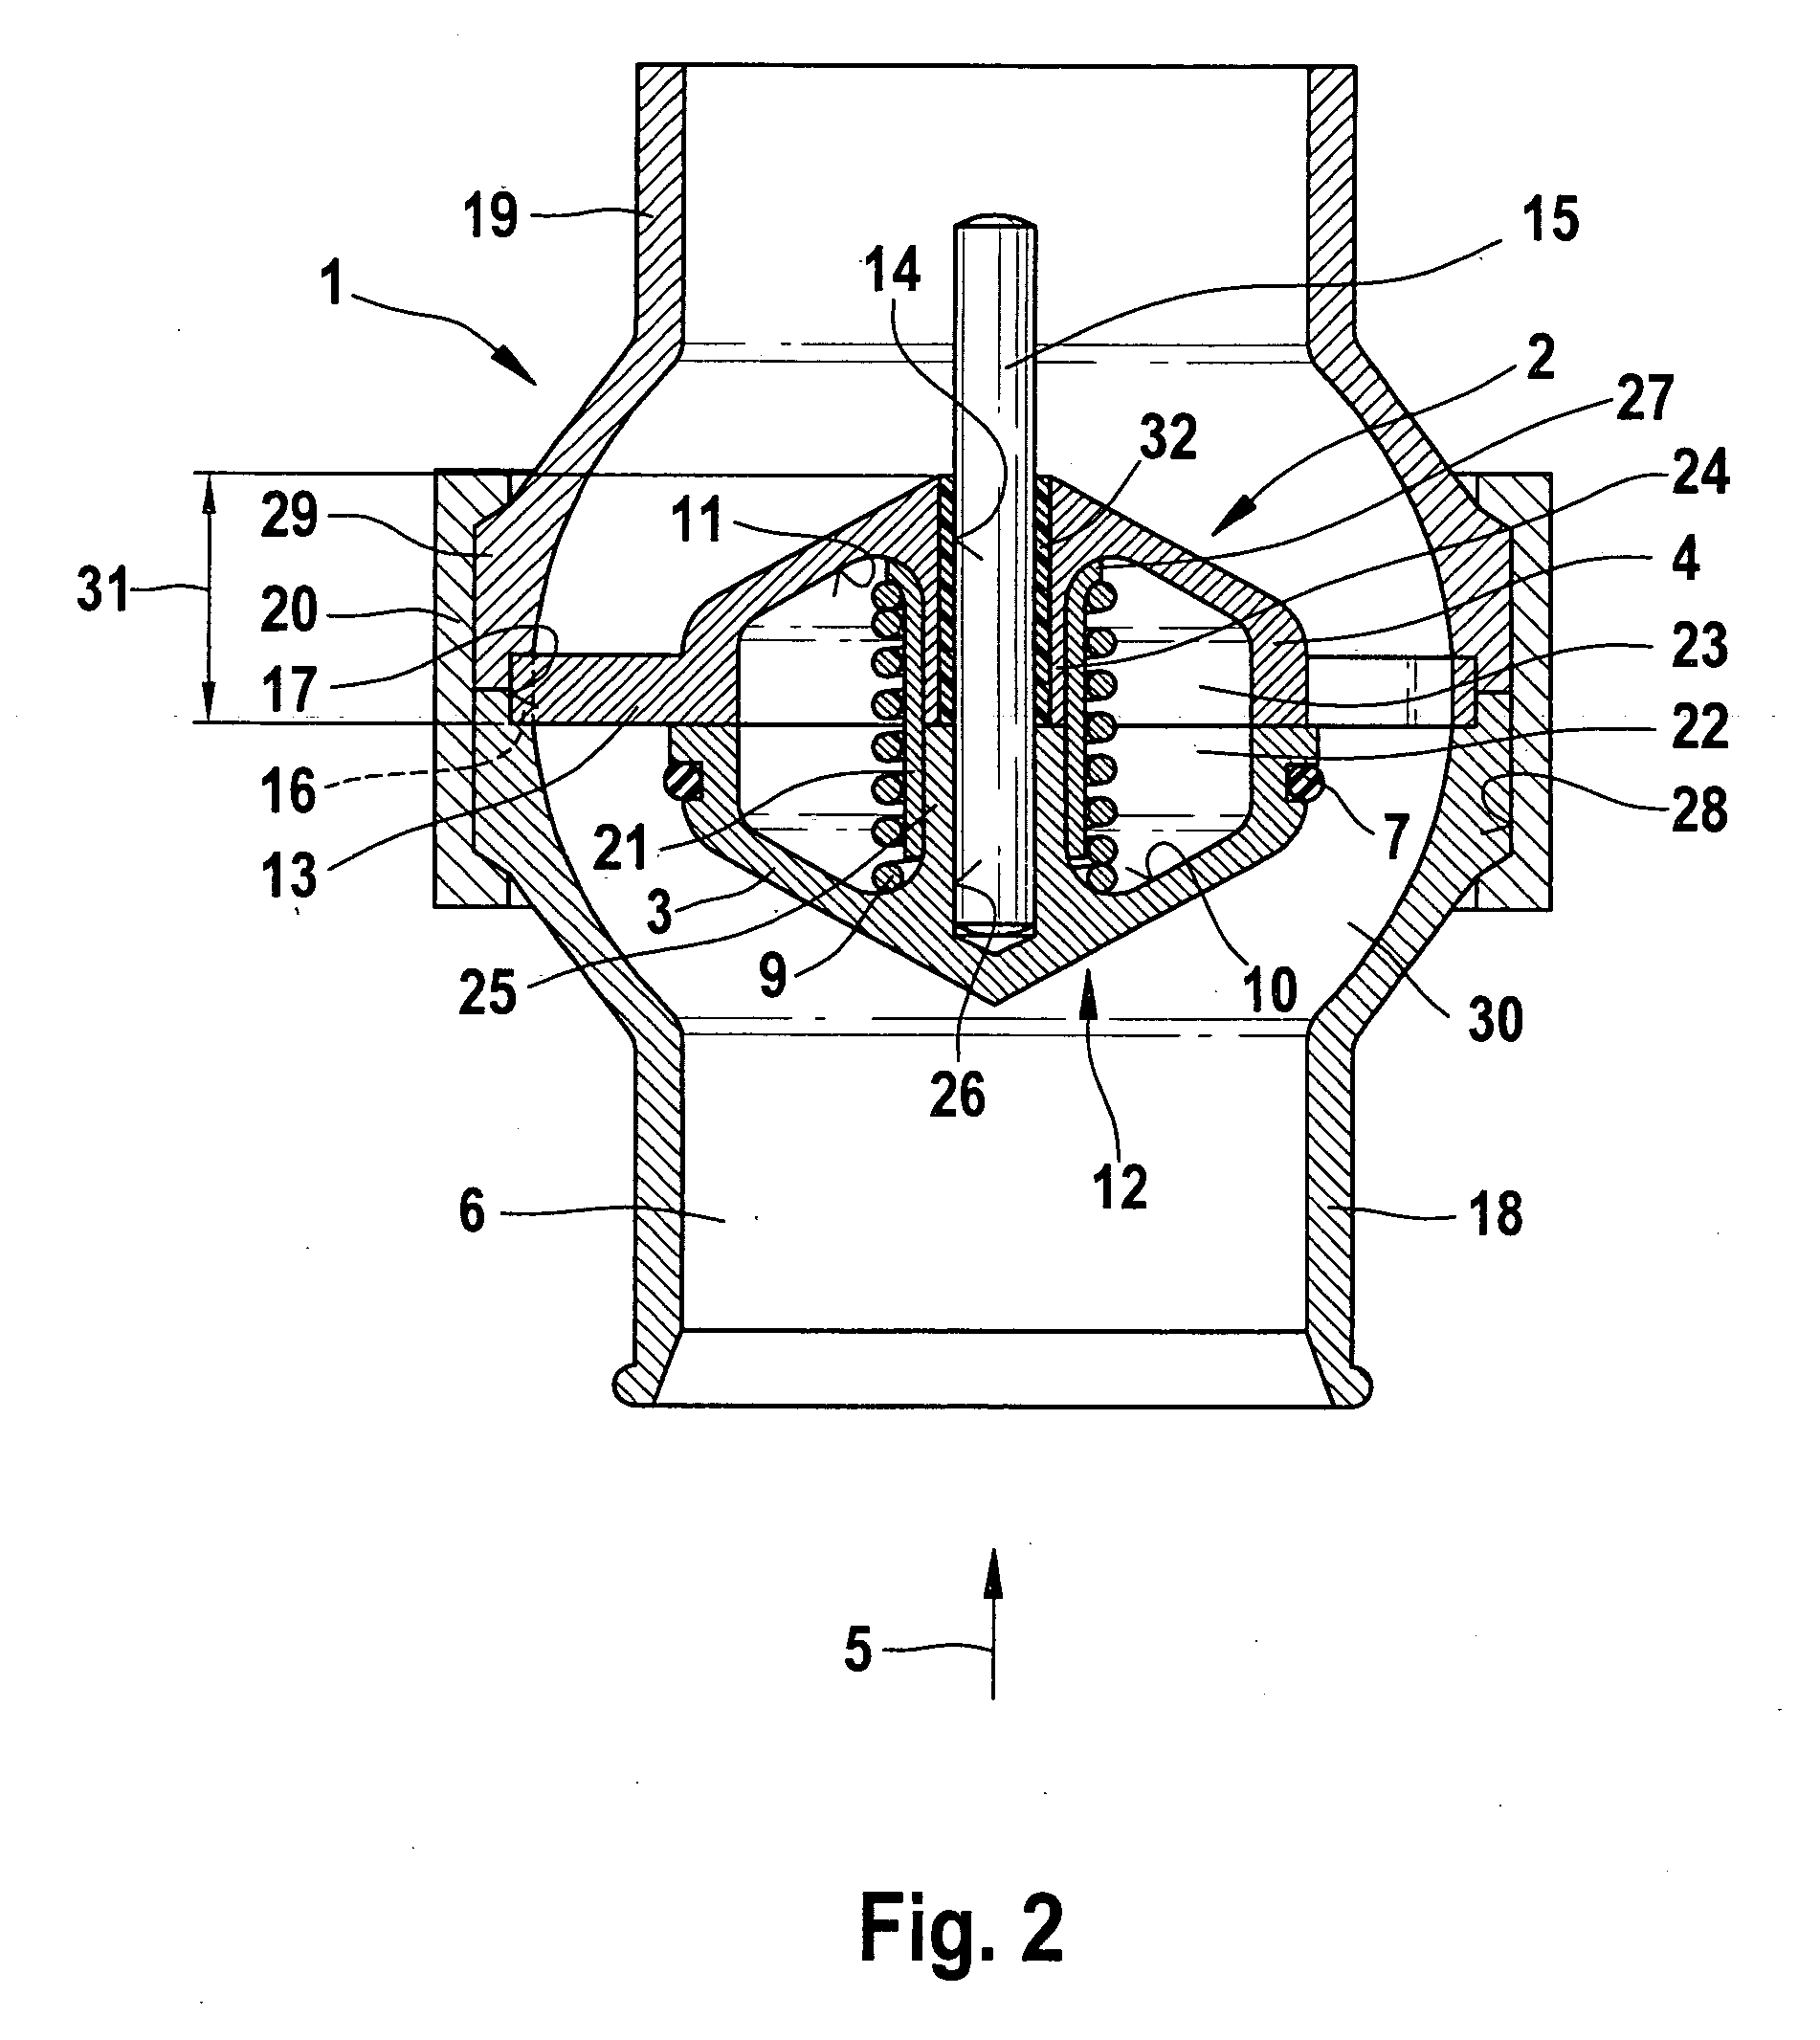 Compressor bypass valve for use in multistage supercharging